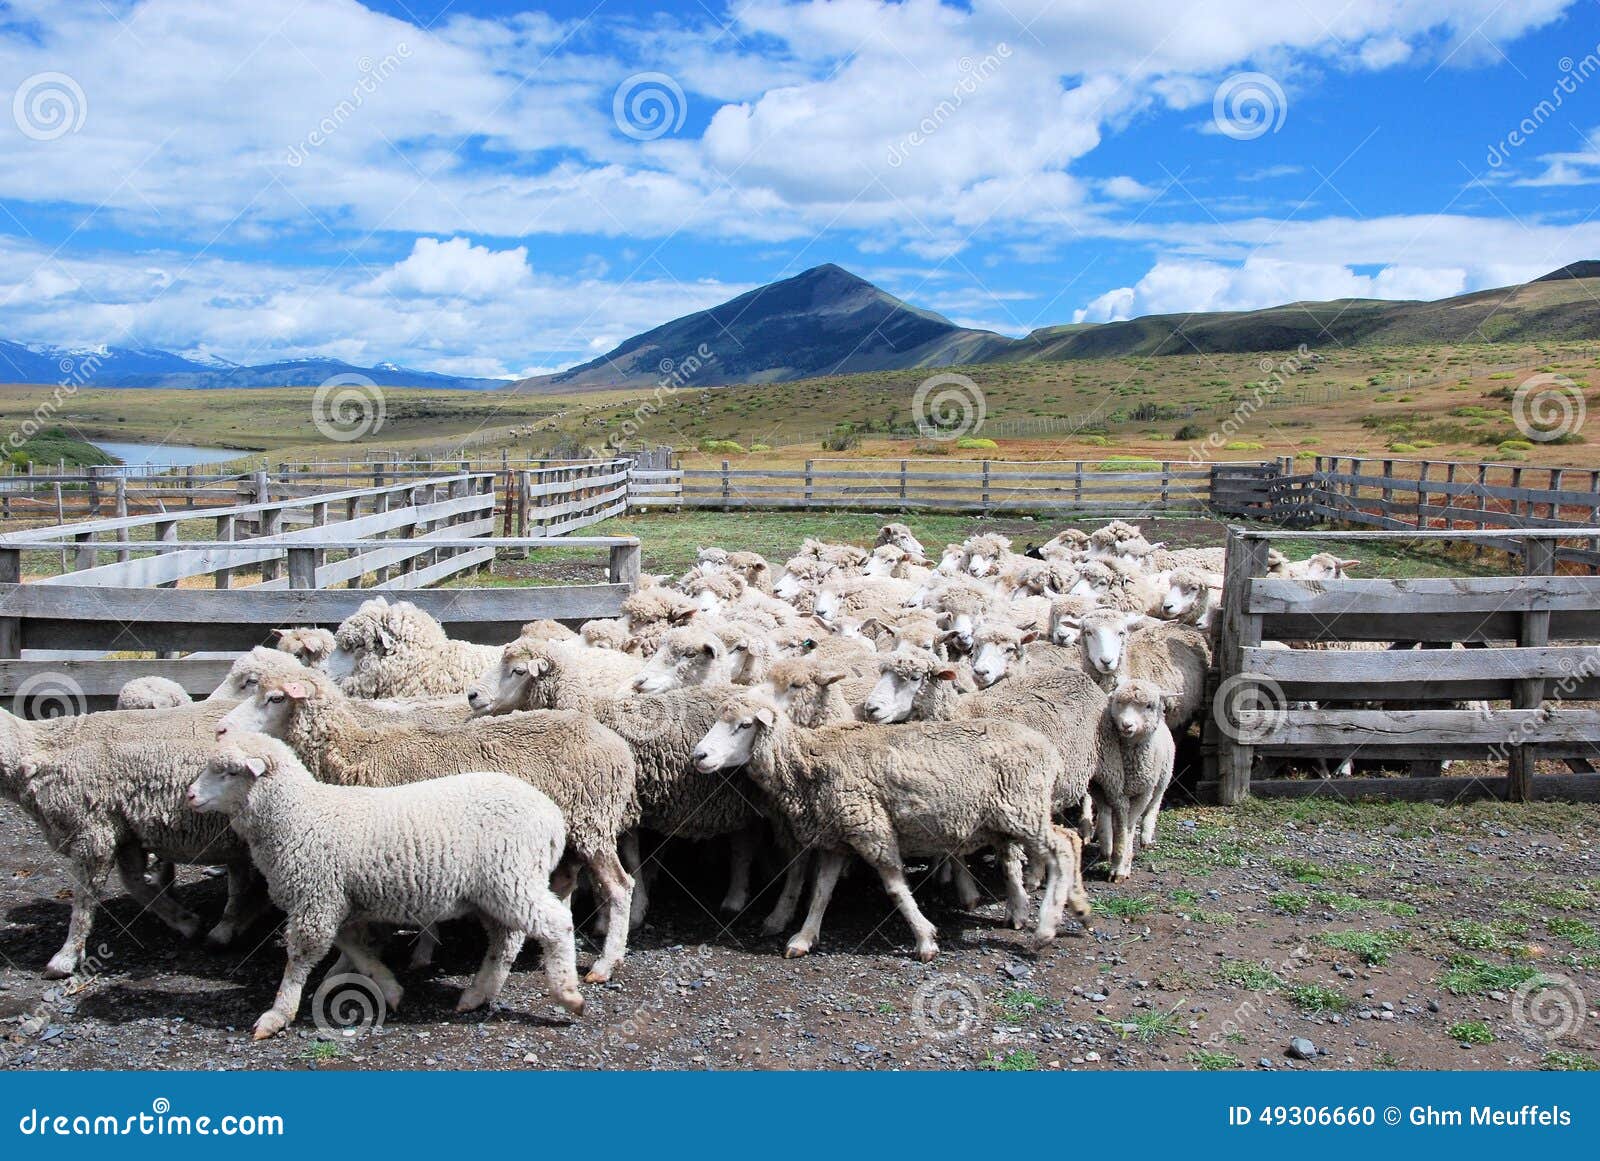 sheep farming in patagonian estancia chili with landscape, clouds sheeps walking out of fence